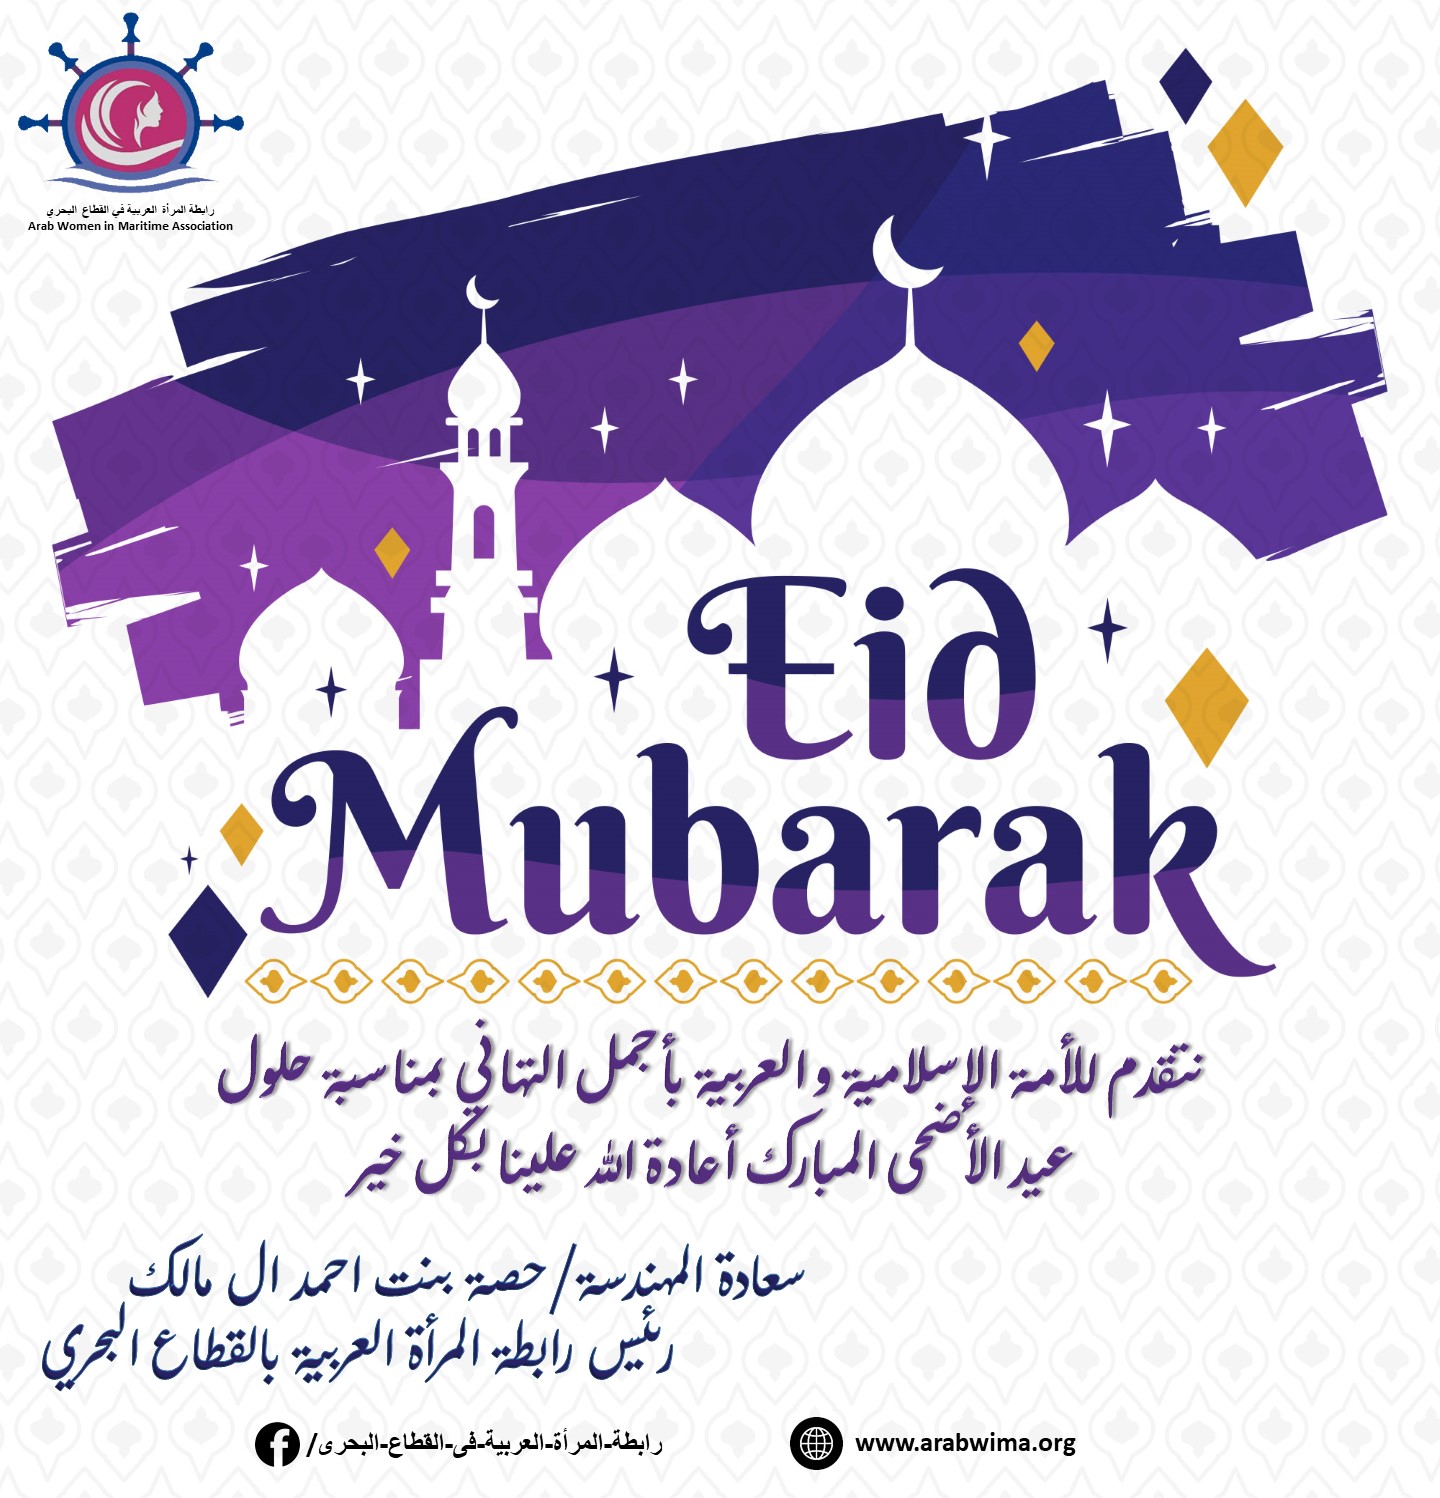 The Association of Arab Women in the Maritime Sector congratulates its members and their generous families on the occasion of Eid Al-Adha, Happy EID - ElAdha.